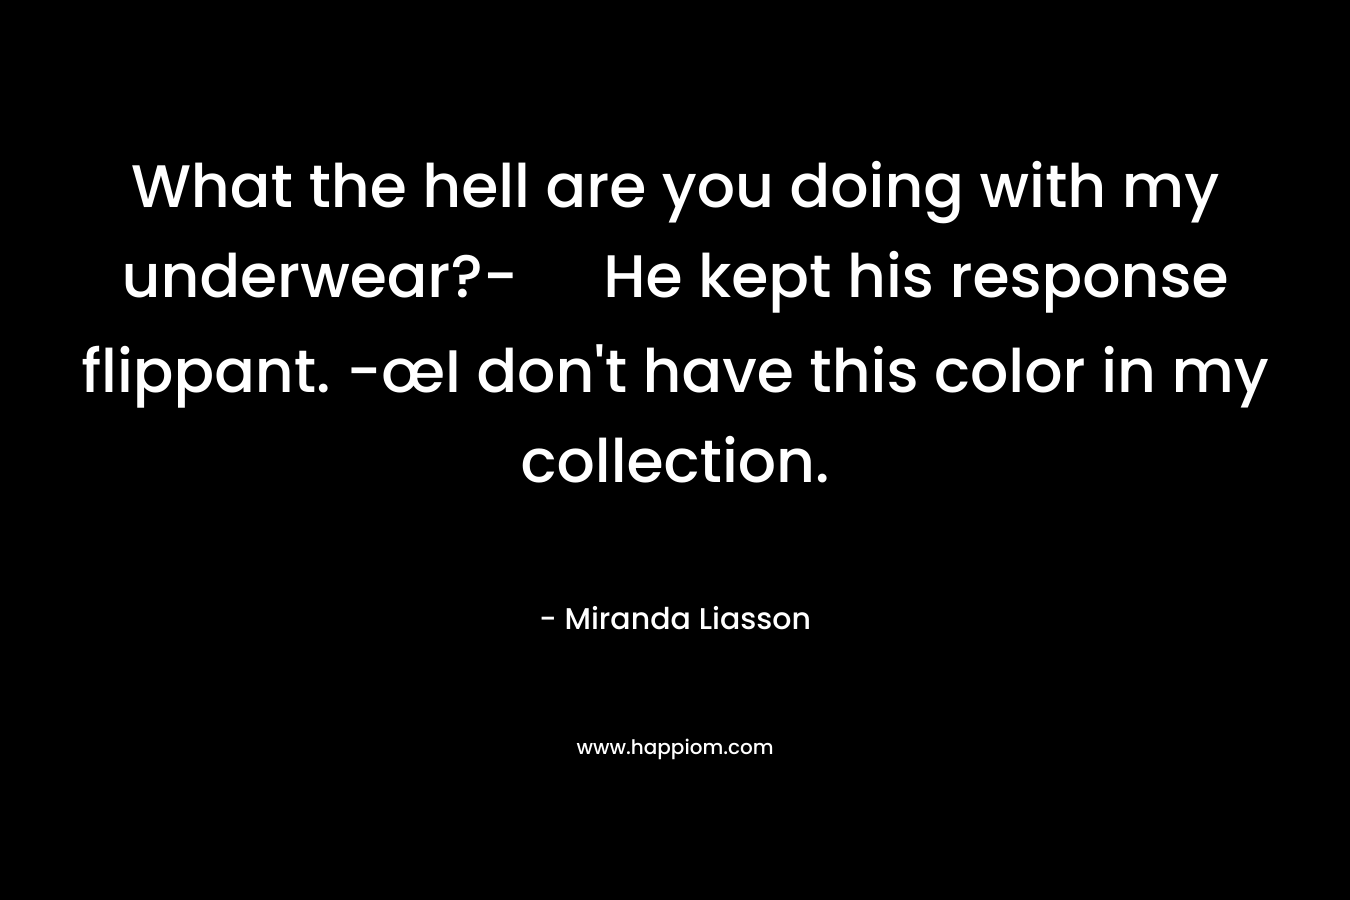 What the hell are you doing with my underwear?- He kept his response flippant. -œI don’t have this color in my collection. – Miranda Liasson